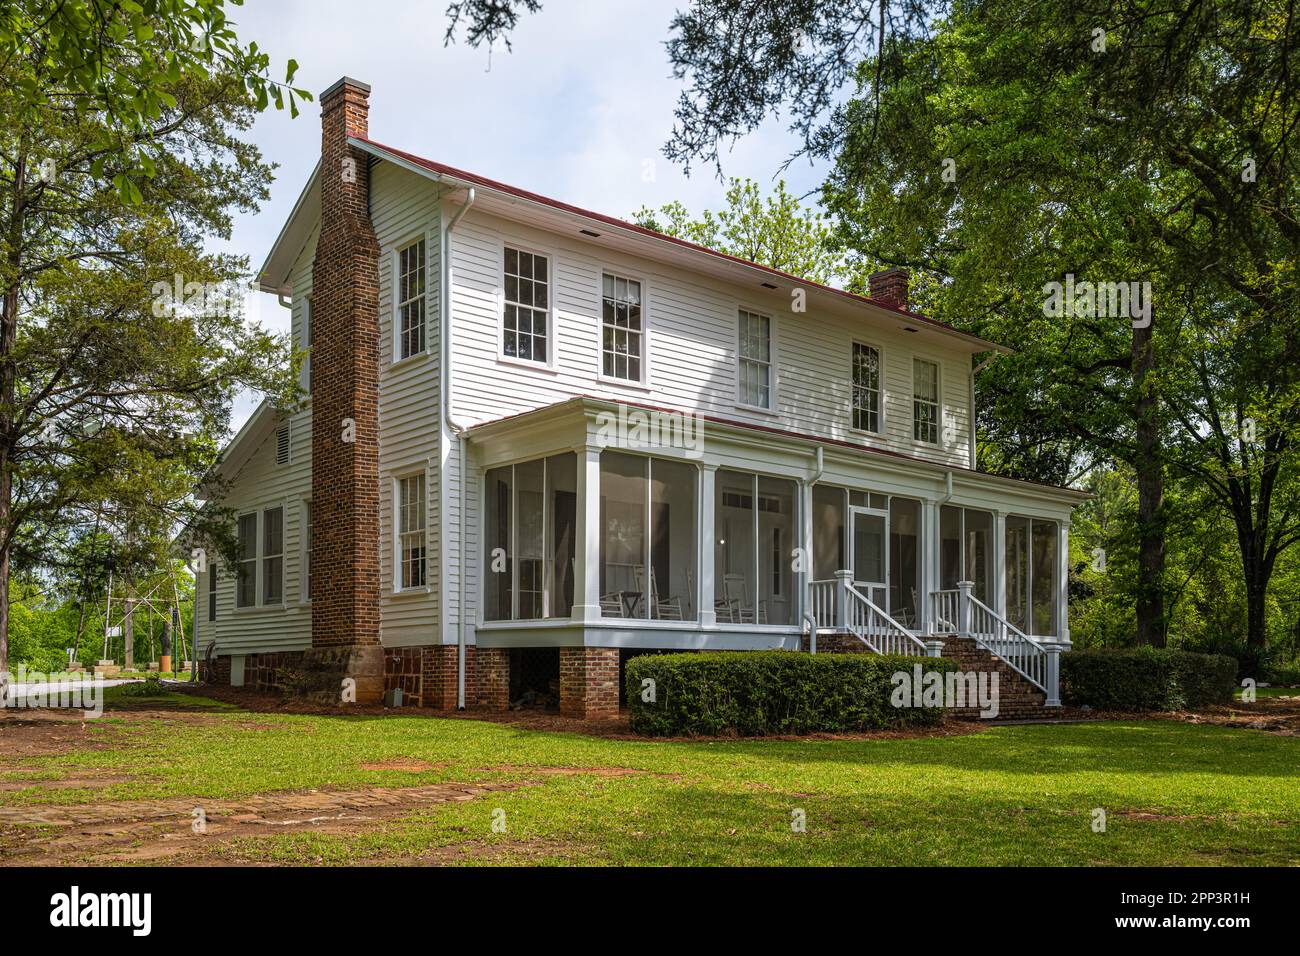 Andalusia, the historic home of American Southern gothic writer Flannery O'Connor in Milledgeville, Georgia. (USA) Stock Photo